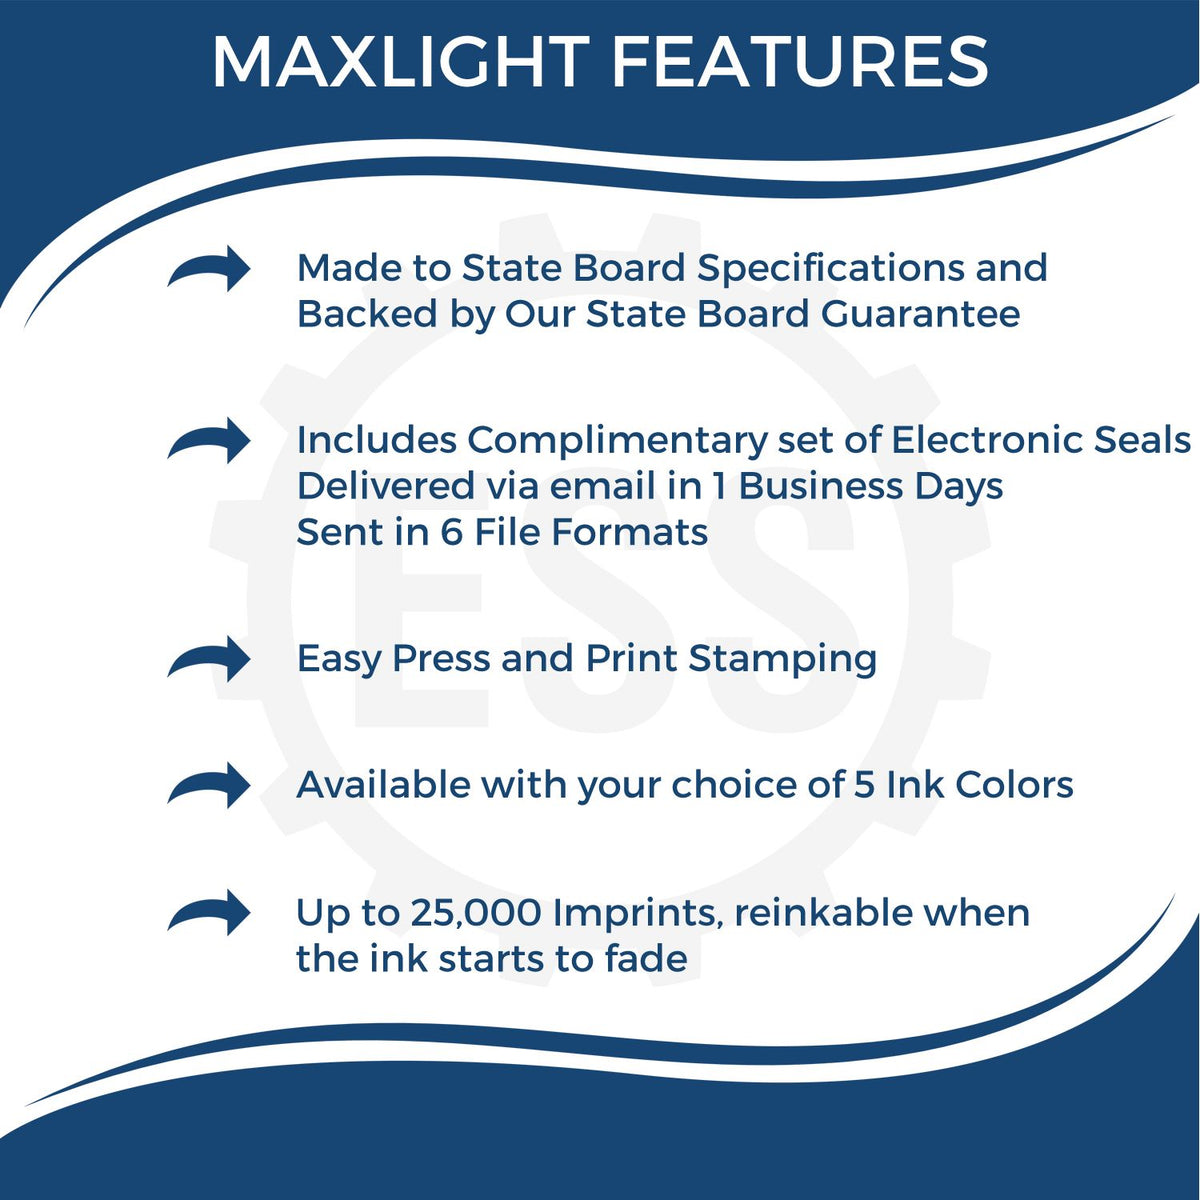 A picture of an infographic highlighting the selling points for the MaxLight Premium Pre-Inked Missouri Rectangular Notarial Stamp